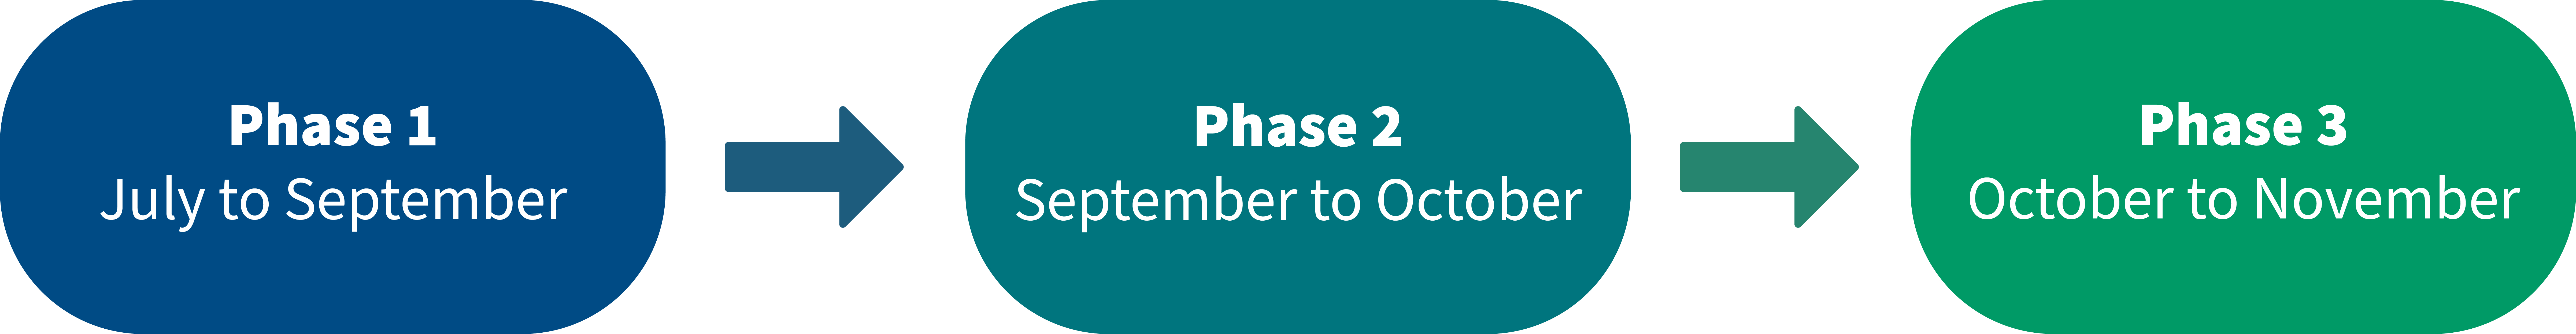 Graphic outlining timelines three project phases: Phase 1 (July to September), Phase 2 (September to October) and Phase 3 (October to November).